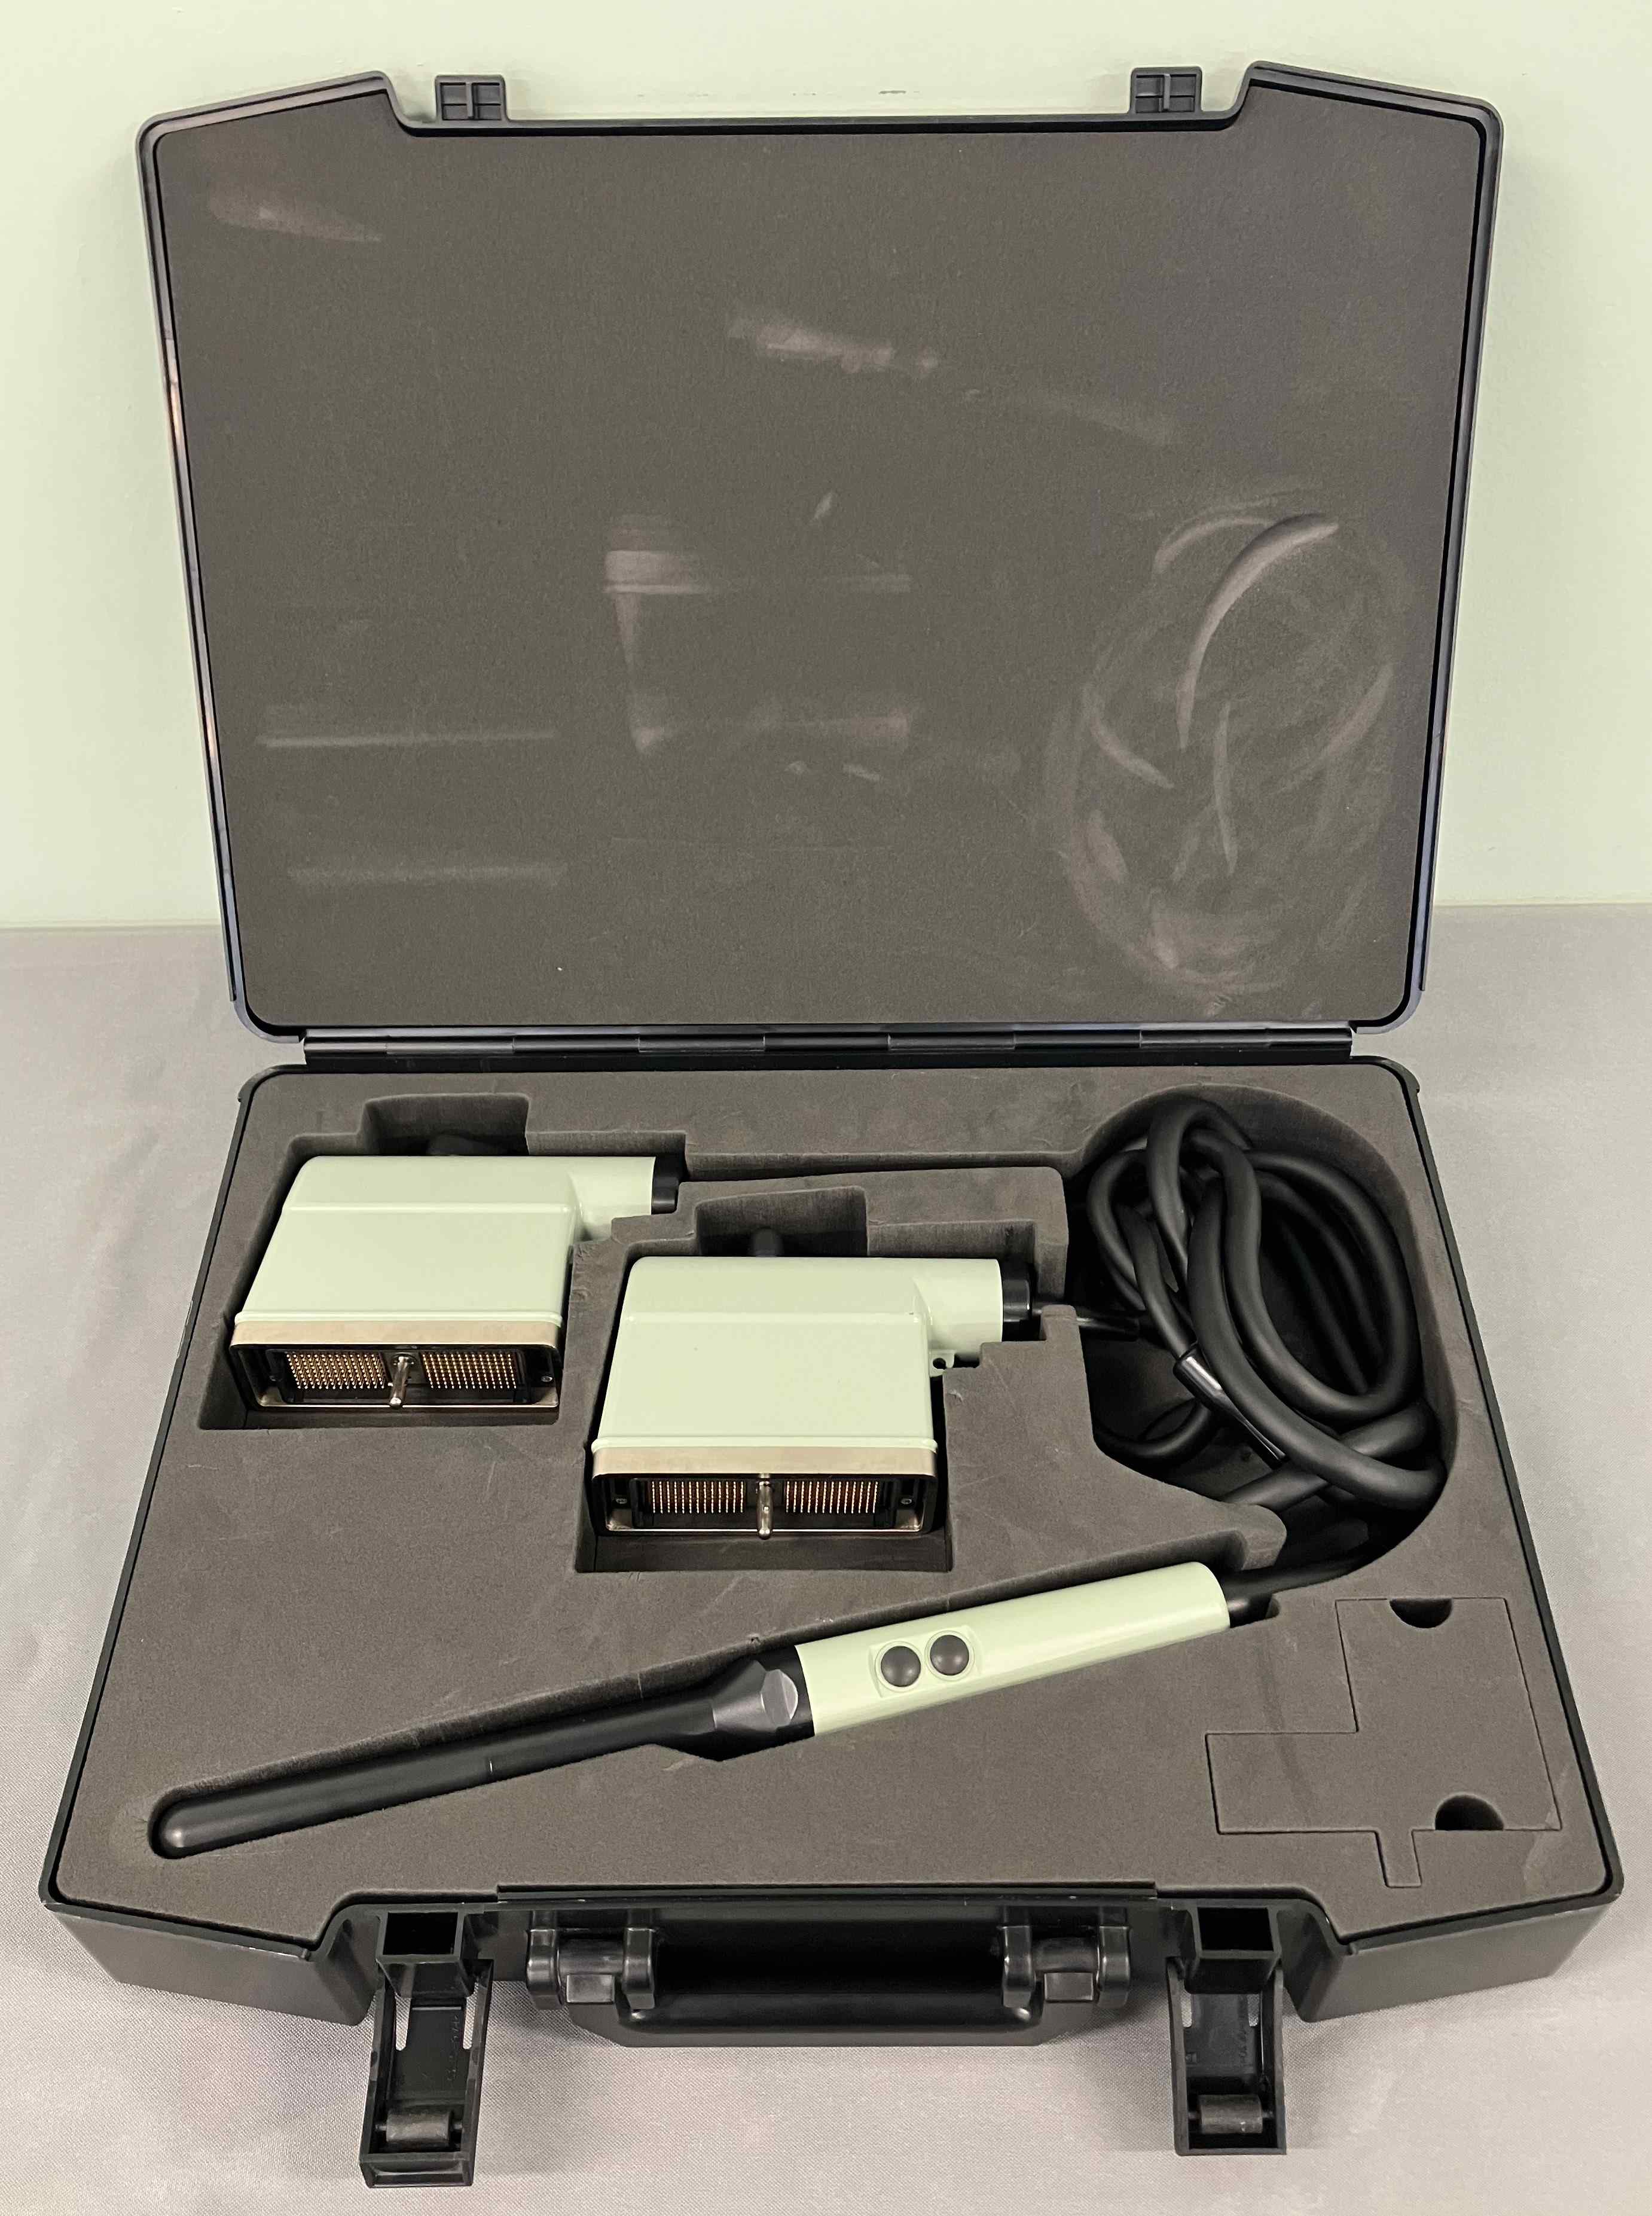 B-K Medical Type 8658 Transducer with Case